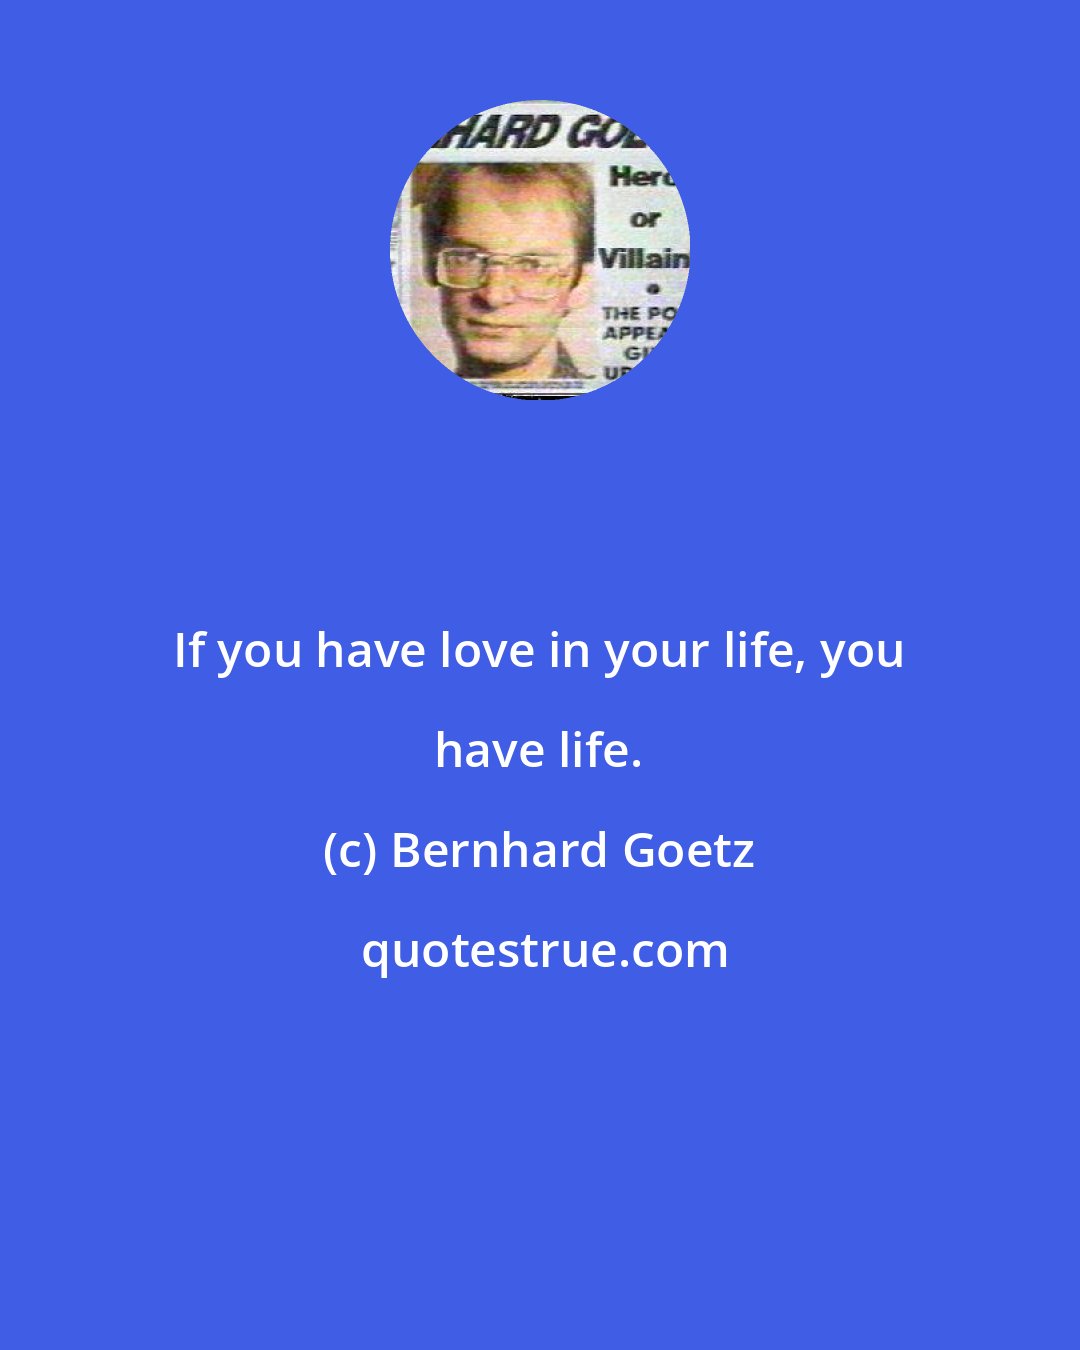 Bernhard Goetz: If you have love in your life, you have life.